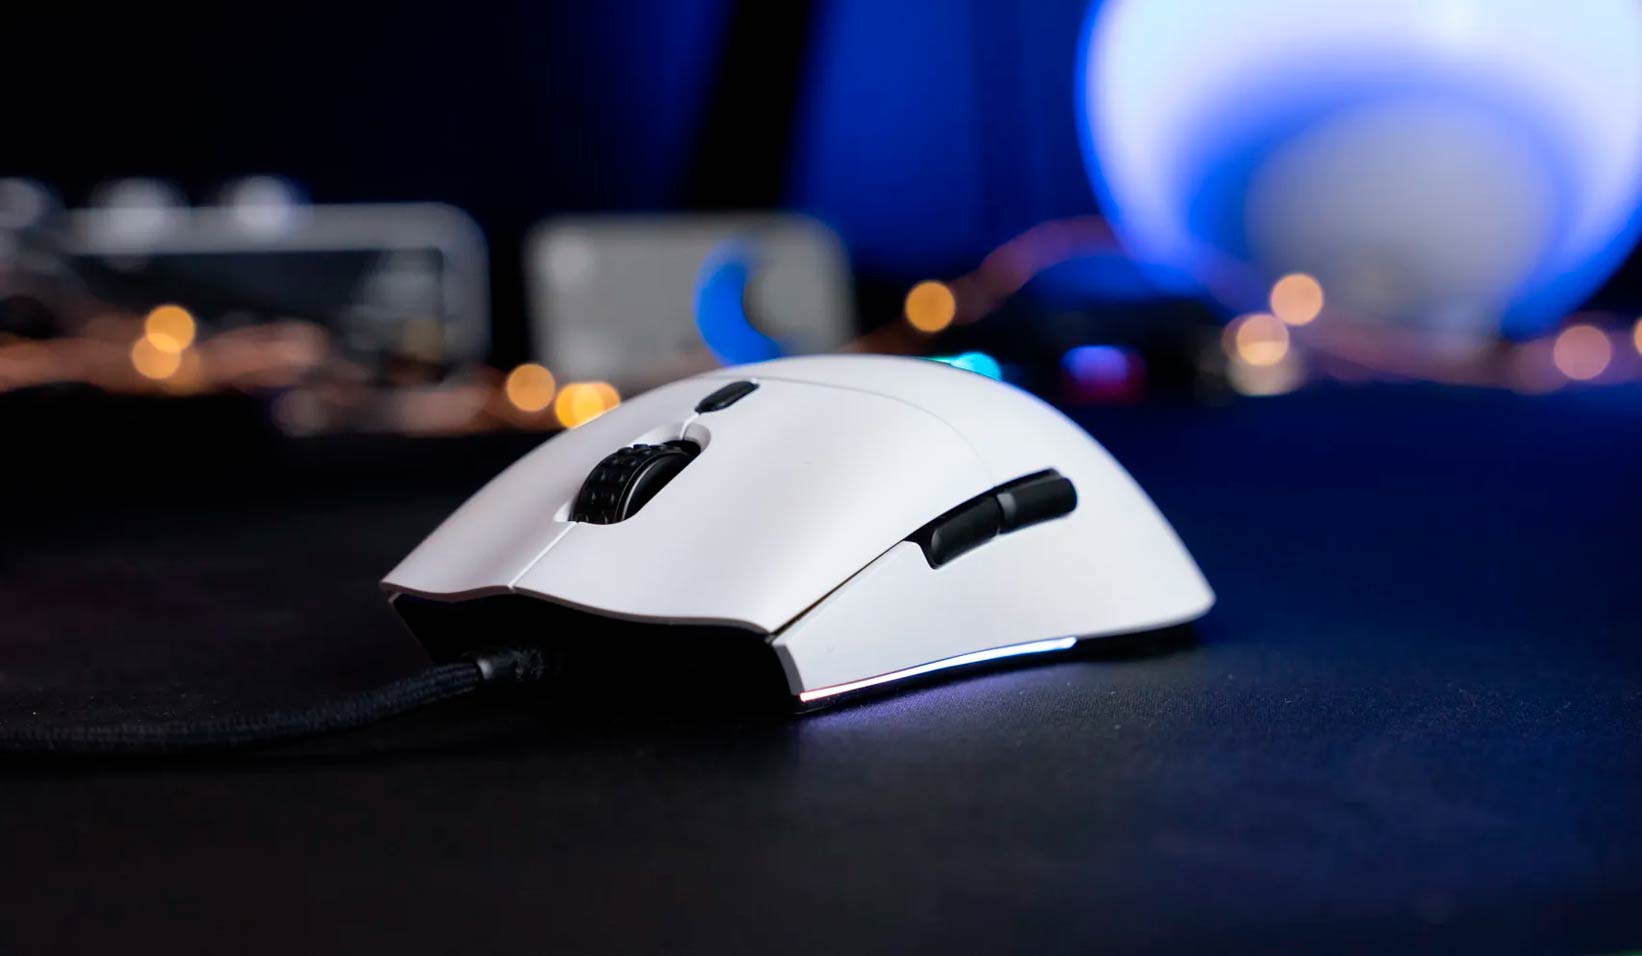 NZXT gaming peripherals are already in Ukraine